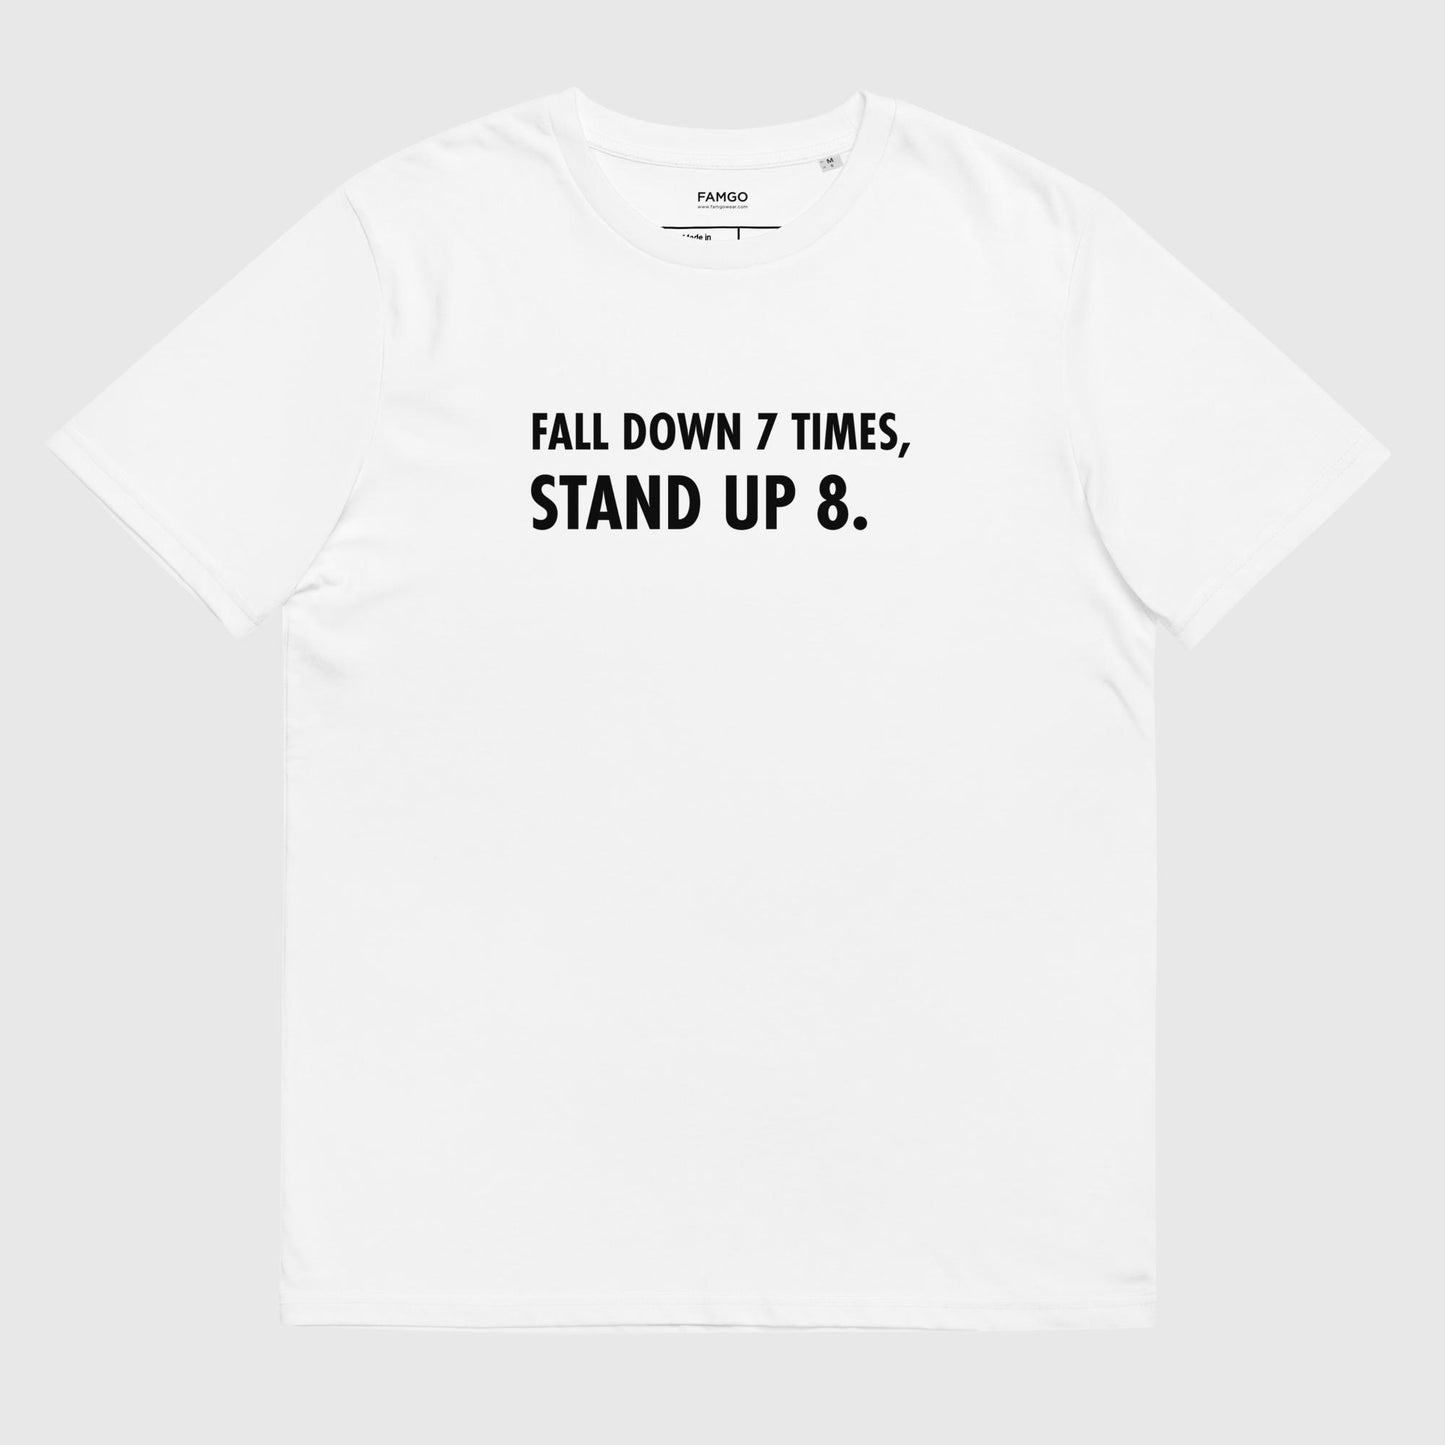 Men's white organic cotton t-shirt that features the Japanese proverb "Fall Down 7 Times, Stand Up 8."